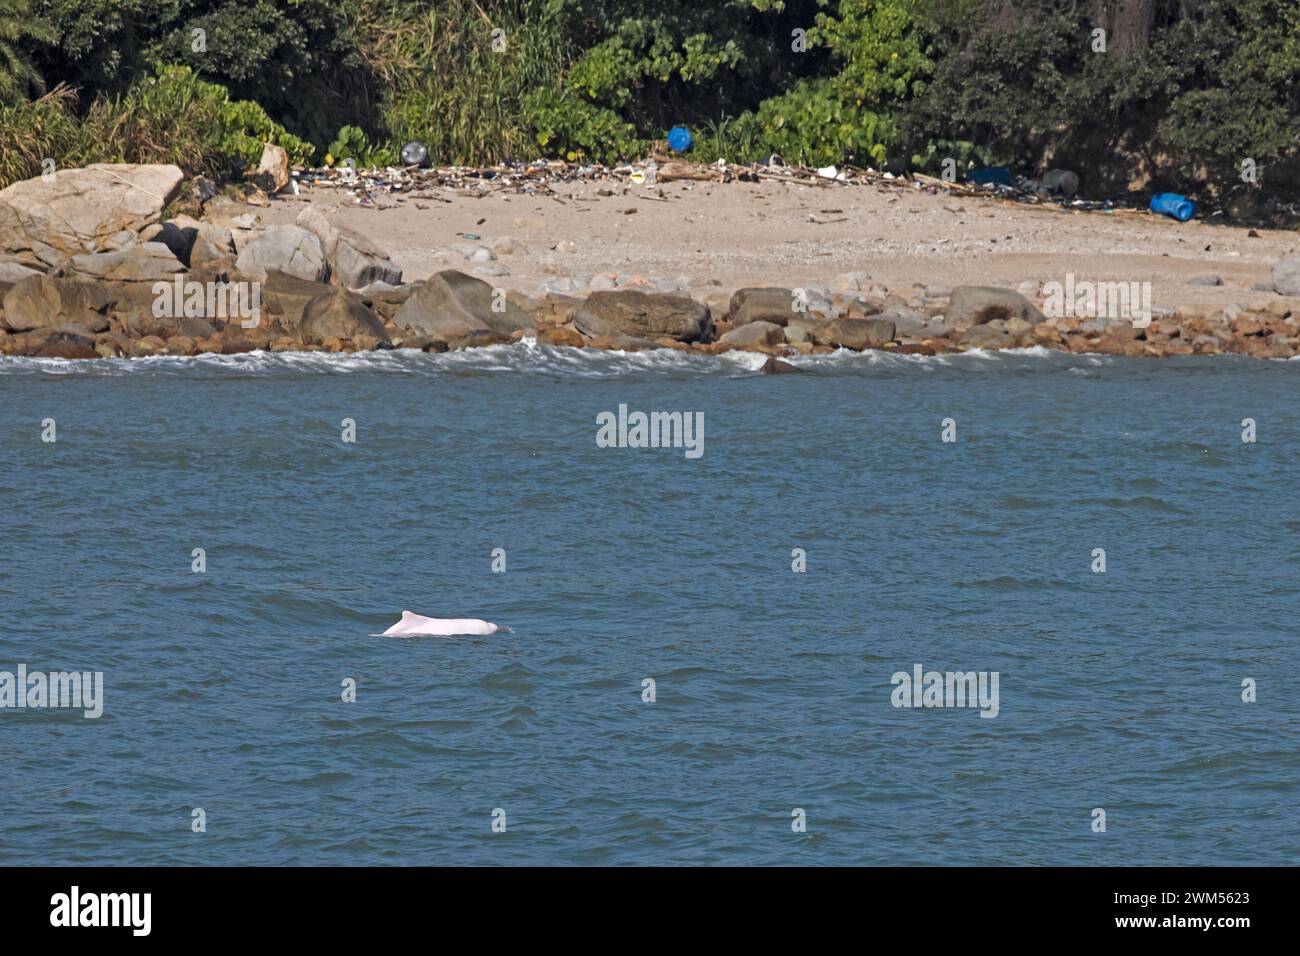 Indo-Pacific Humpback Dolphin (Sousa Chinensis) swimming along the natural coastline of Lantau, with lots of rubbish on land Stock Photo